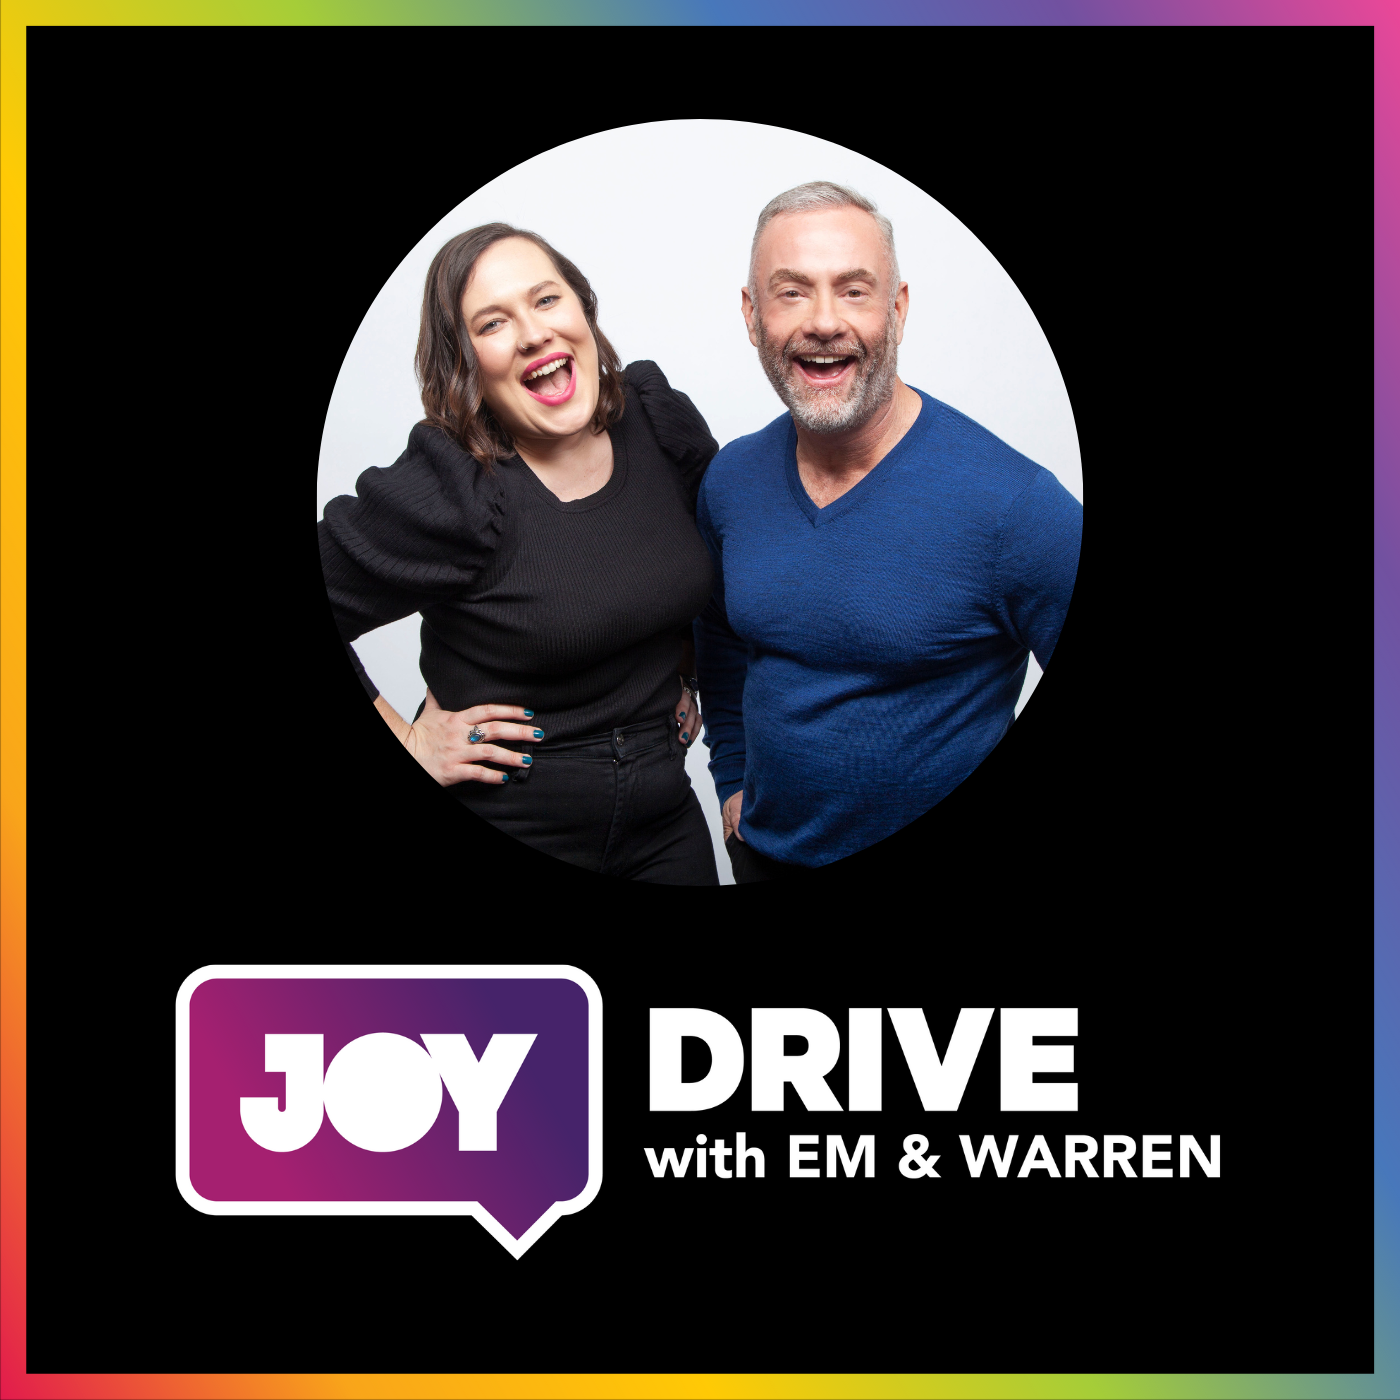 Dr Wolfgang Marx x JOY Drive: Early Therapy Gains